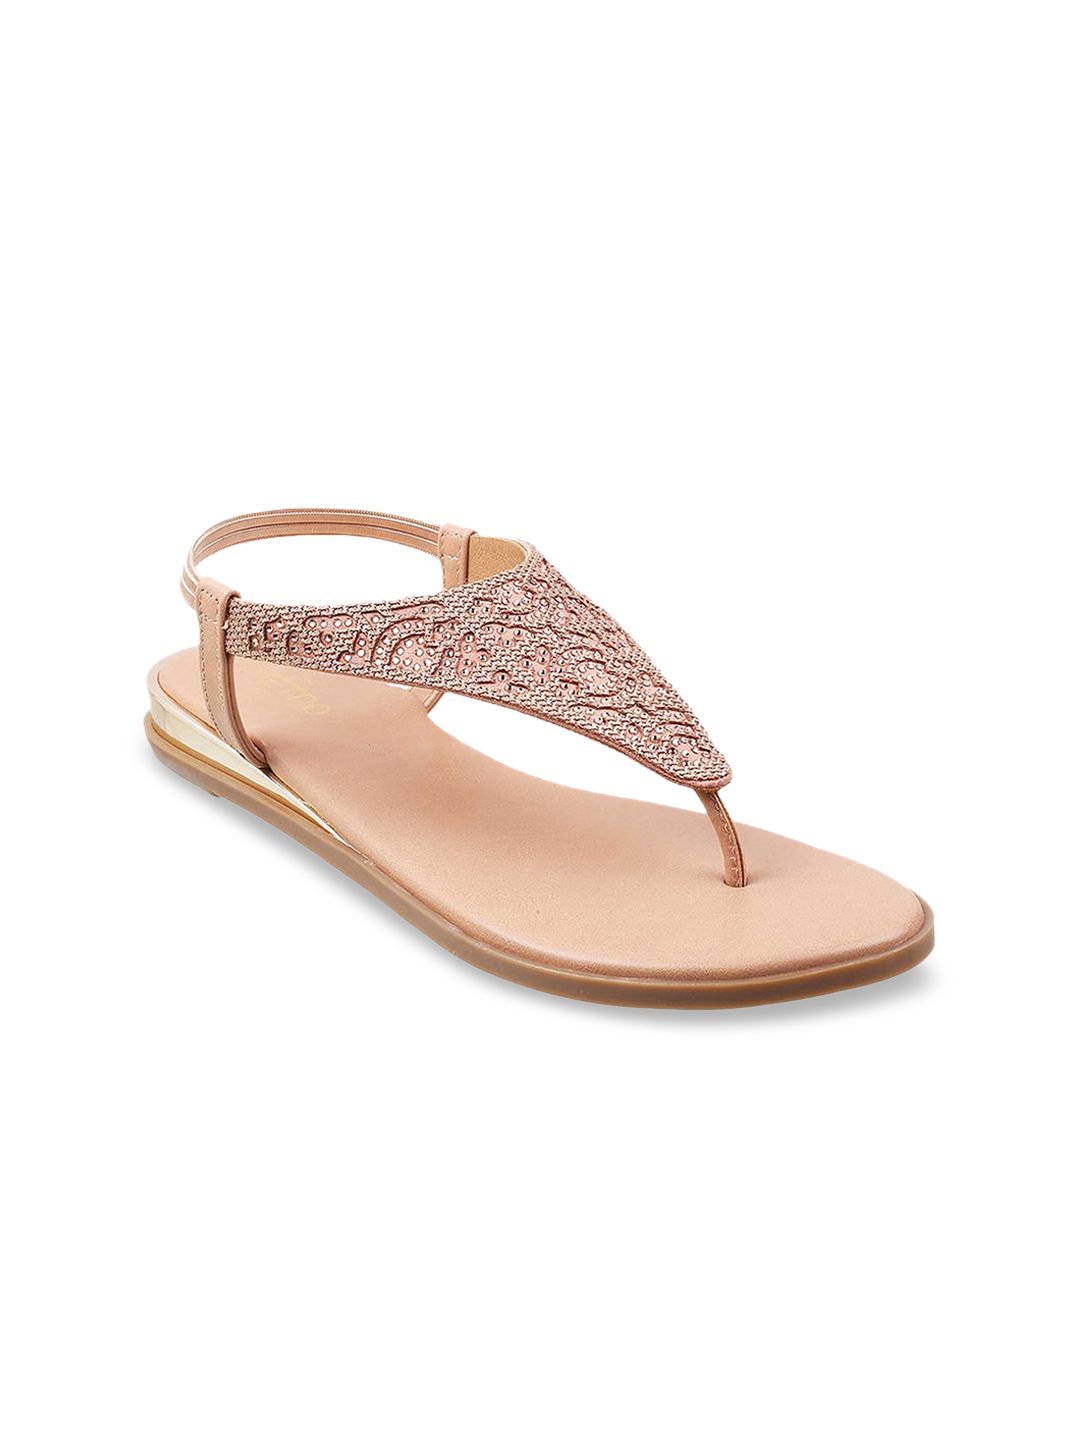 Metro Women Rose Gold Embellished Open Toe Flats Price in India